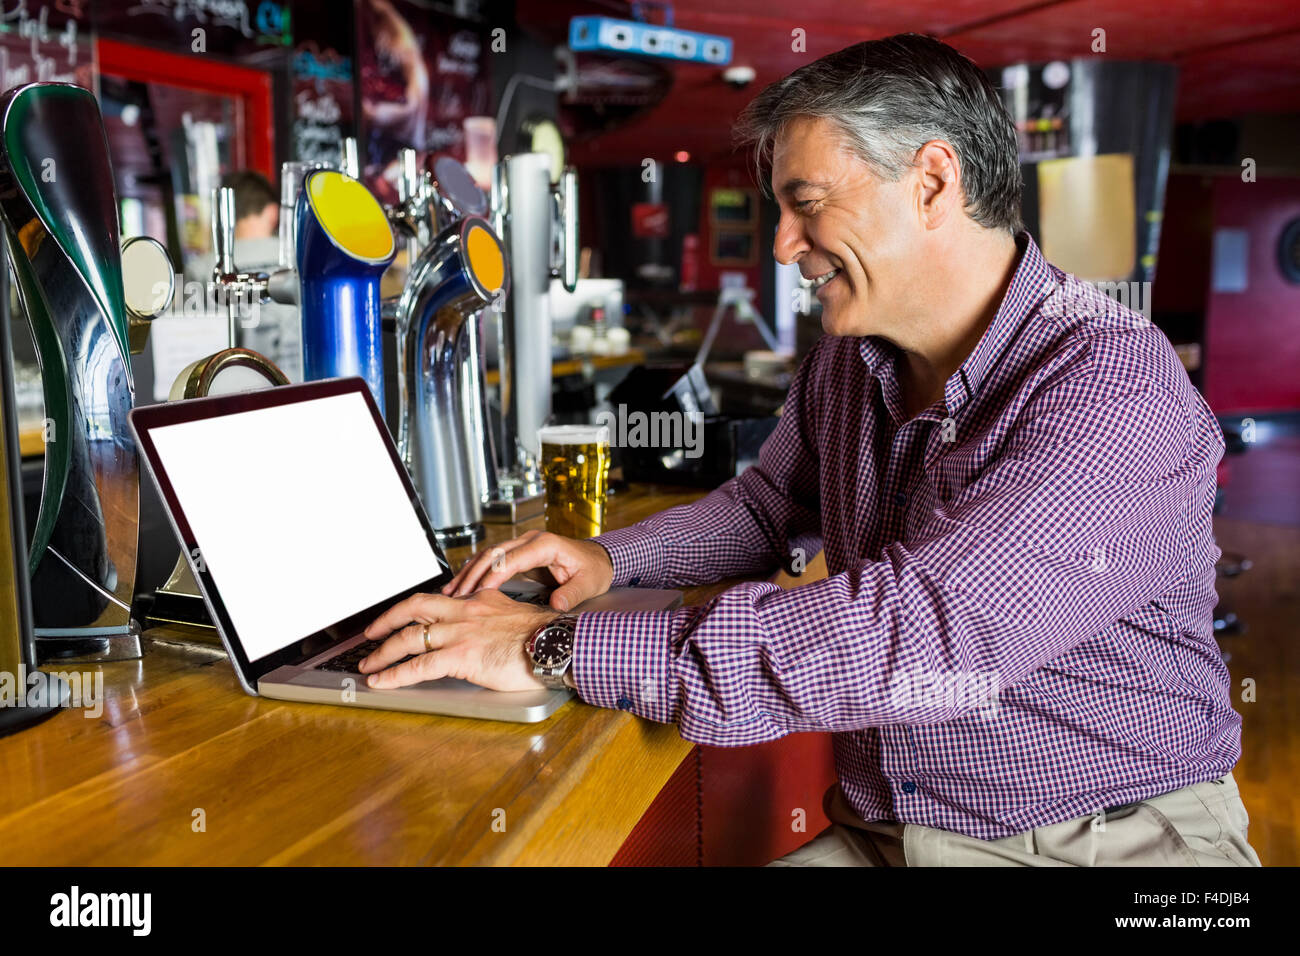 Man with grey hair using his laptop Stock Photo